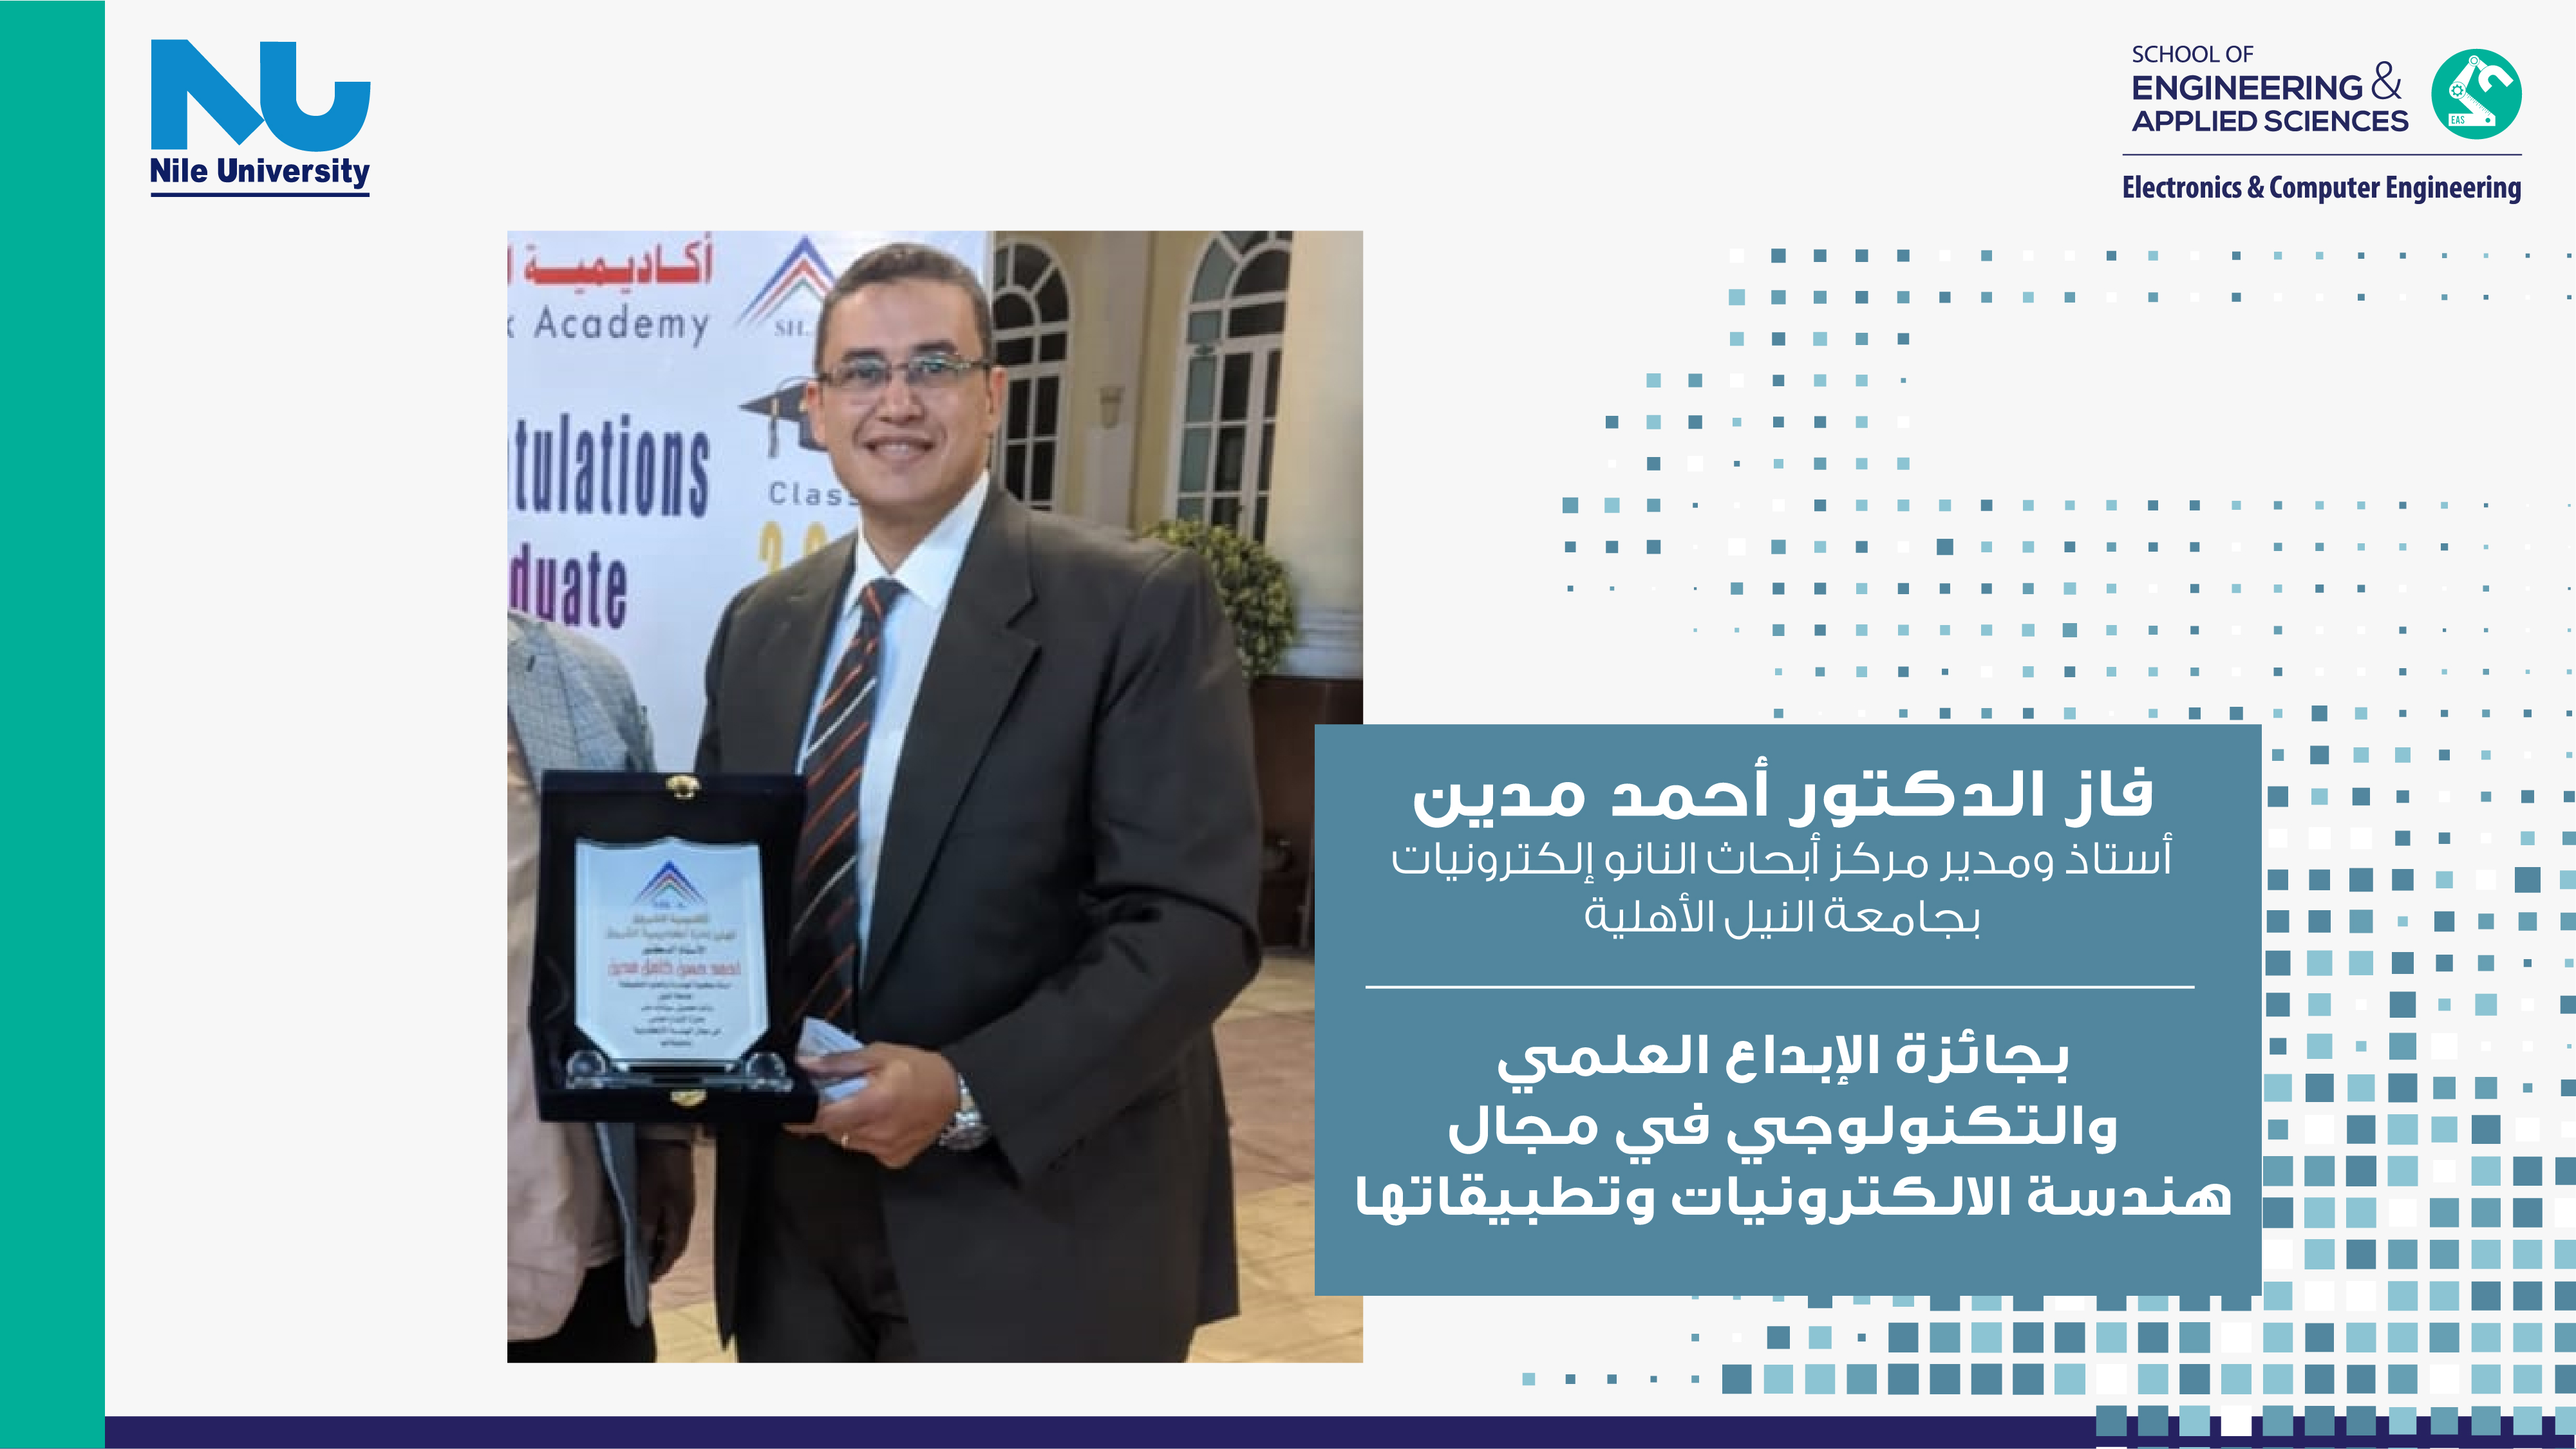 Dr. Ahmed Madian won the prize for scientific and technological innovation in the field of electronics engineering and its applications.